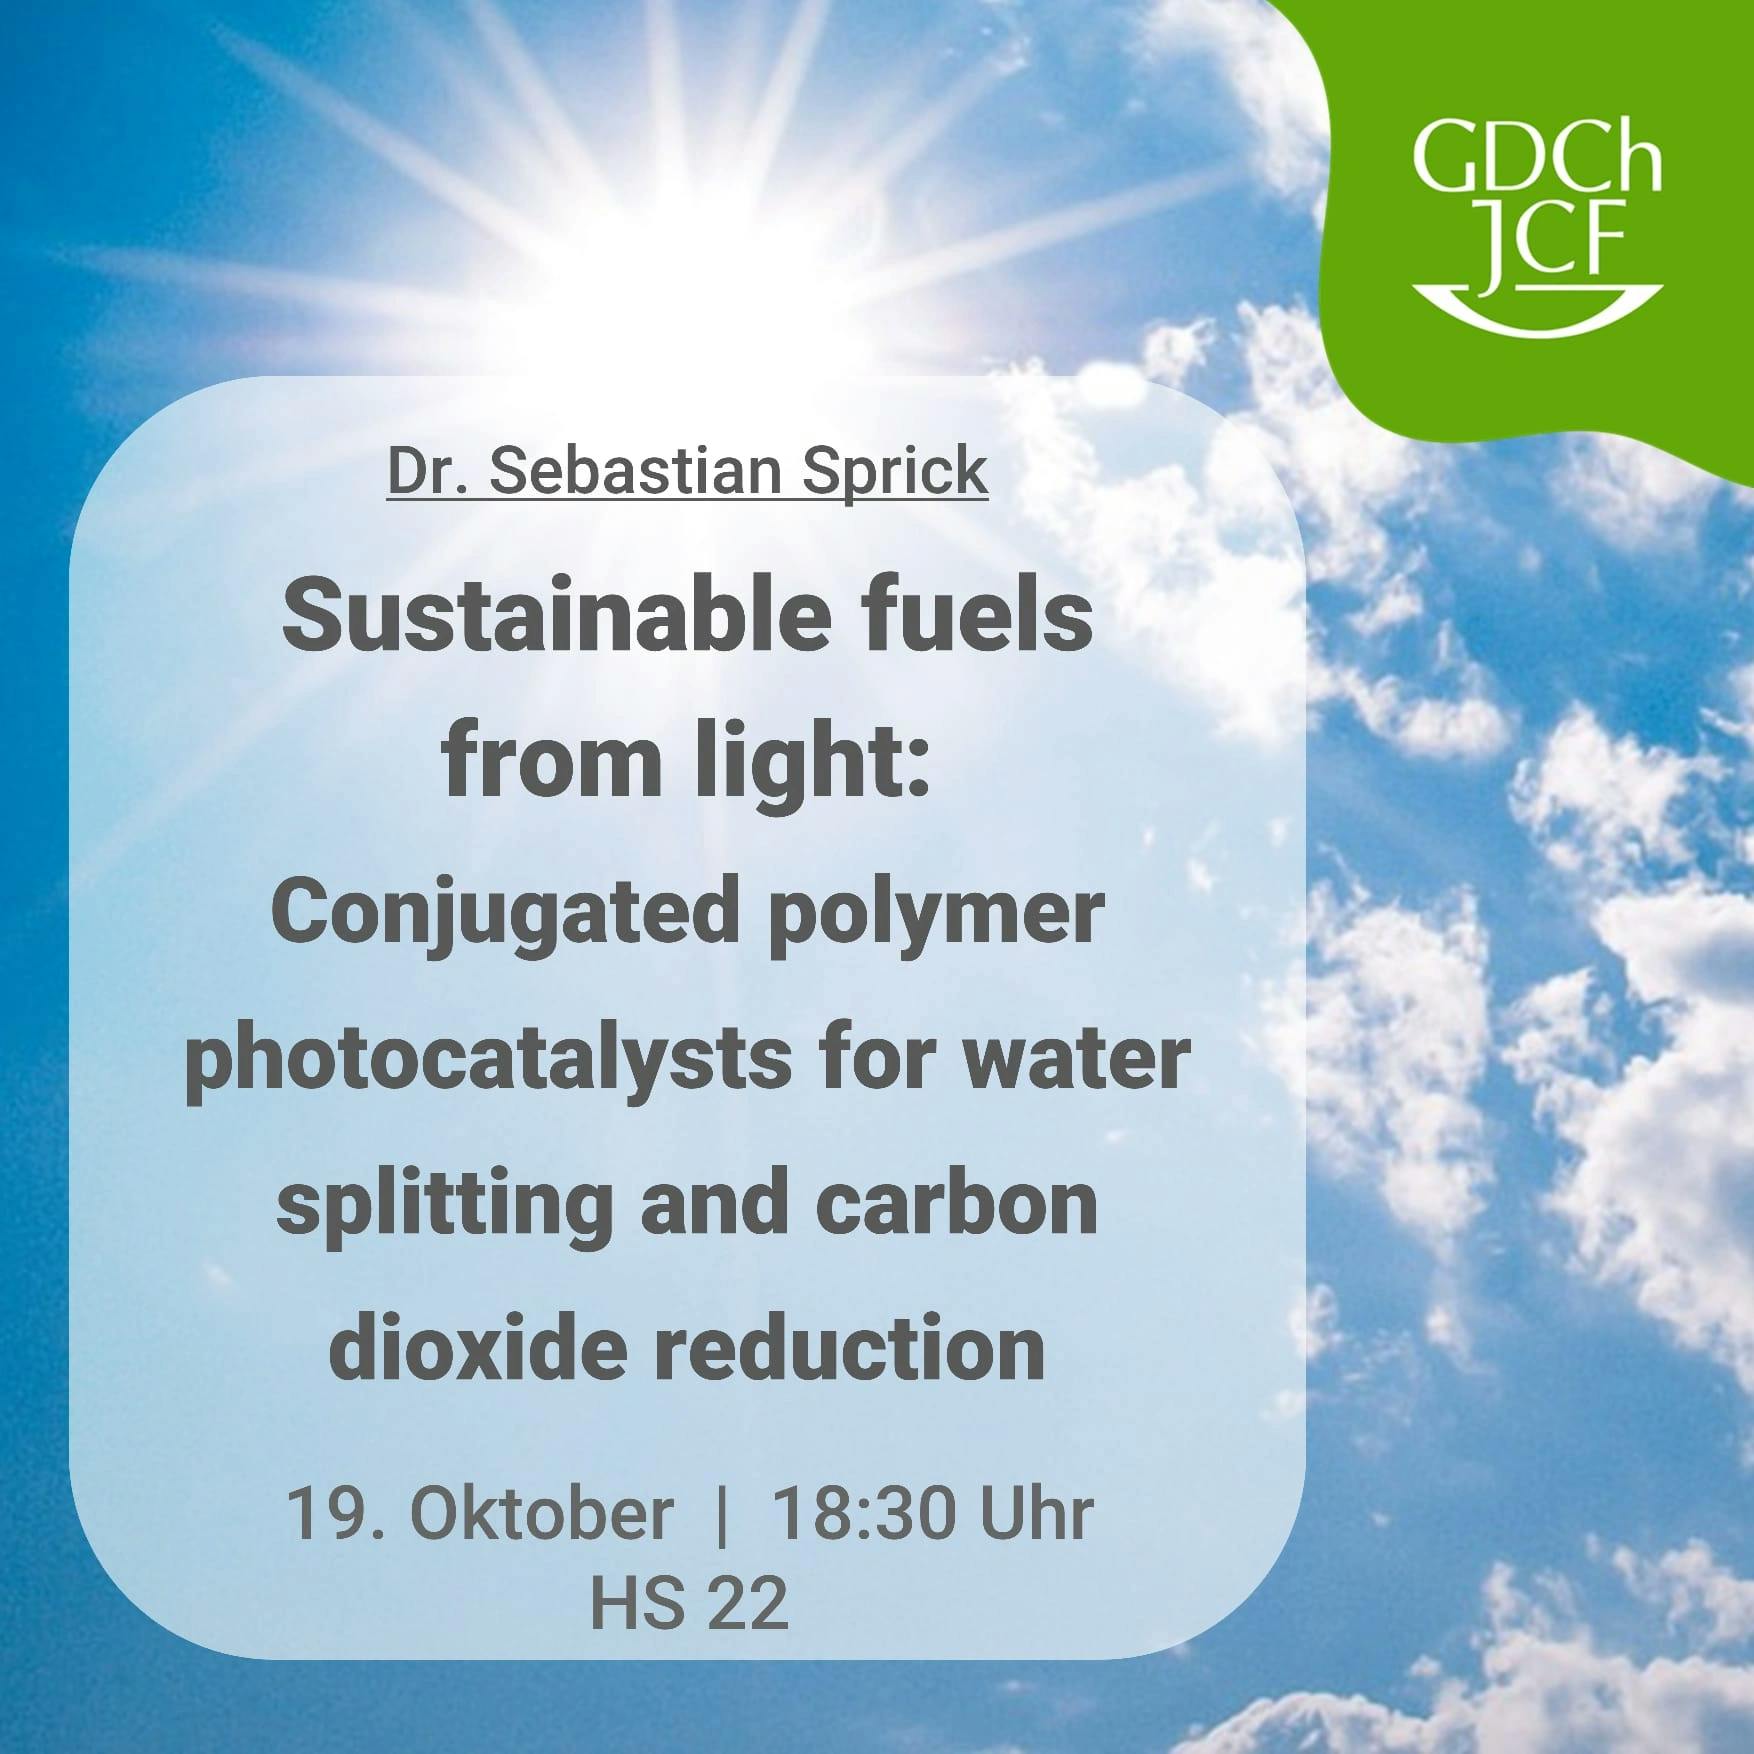 Sustainable fuels from light: Conjugated polymer photocatalysts for water splitting and carbon dioxide reduction